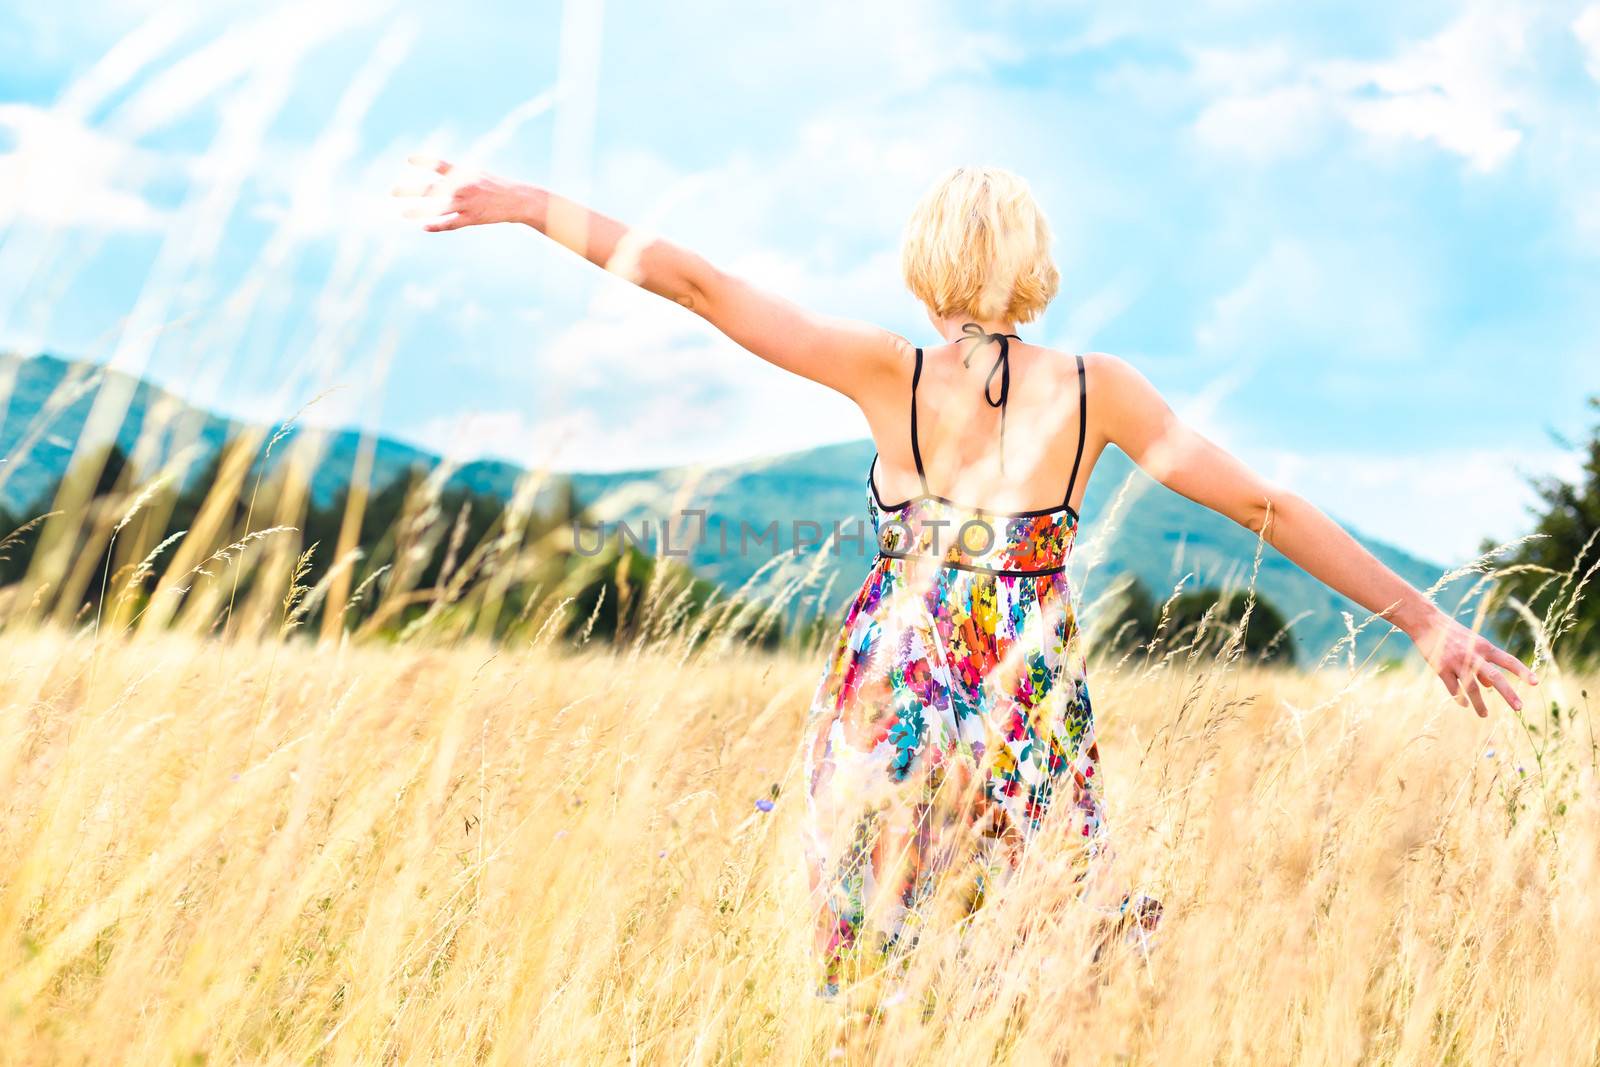 Lady enjoying the nature. Young woman arms raised enjoying the fresh air in summer meadow.